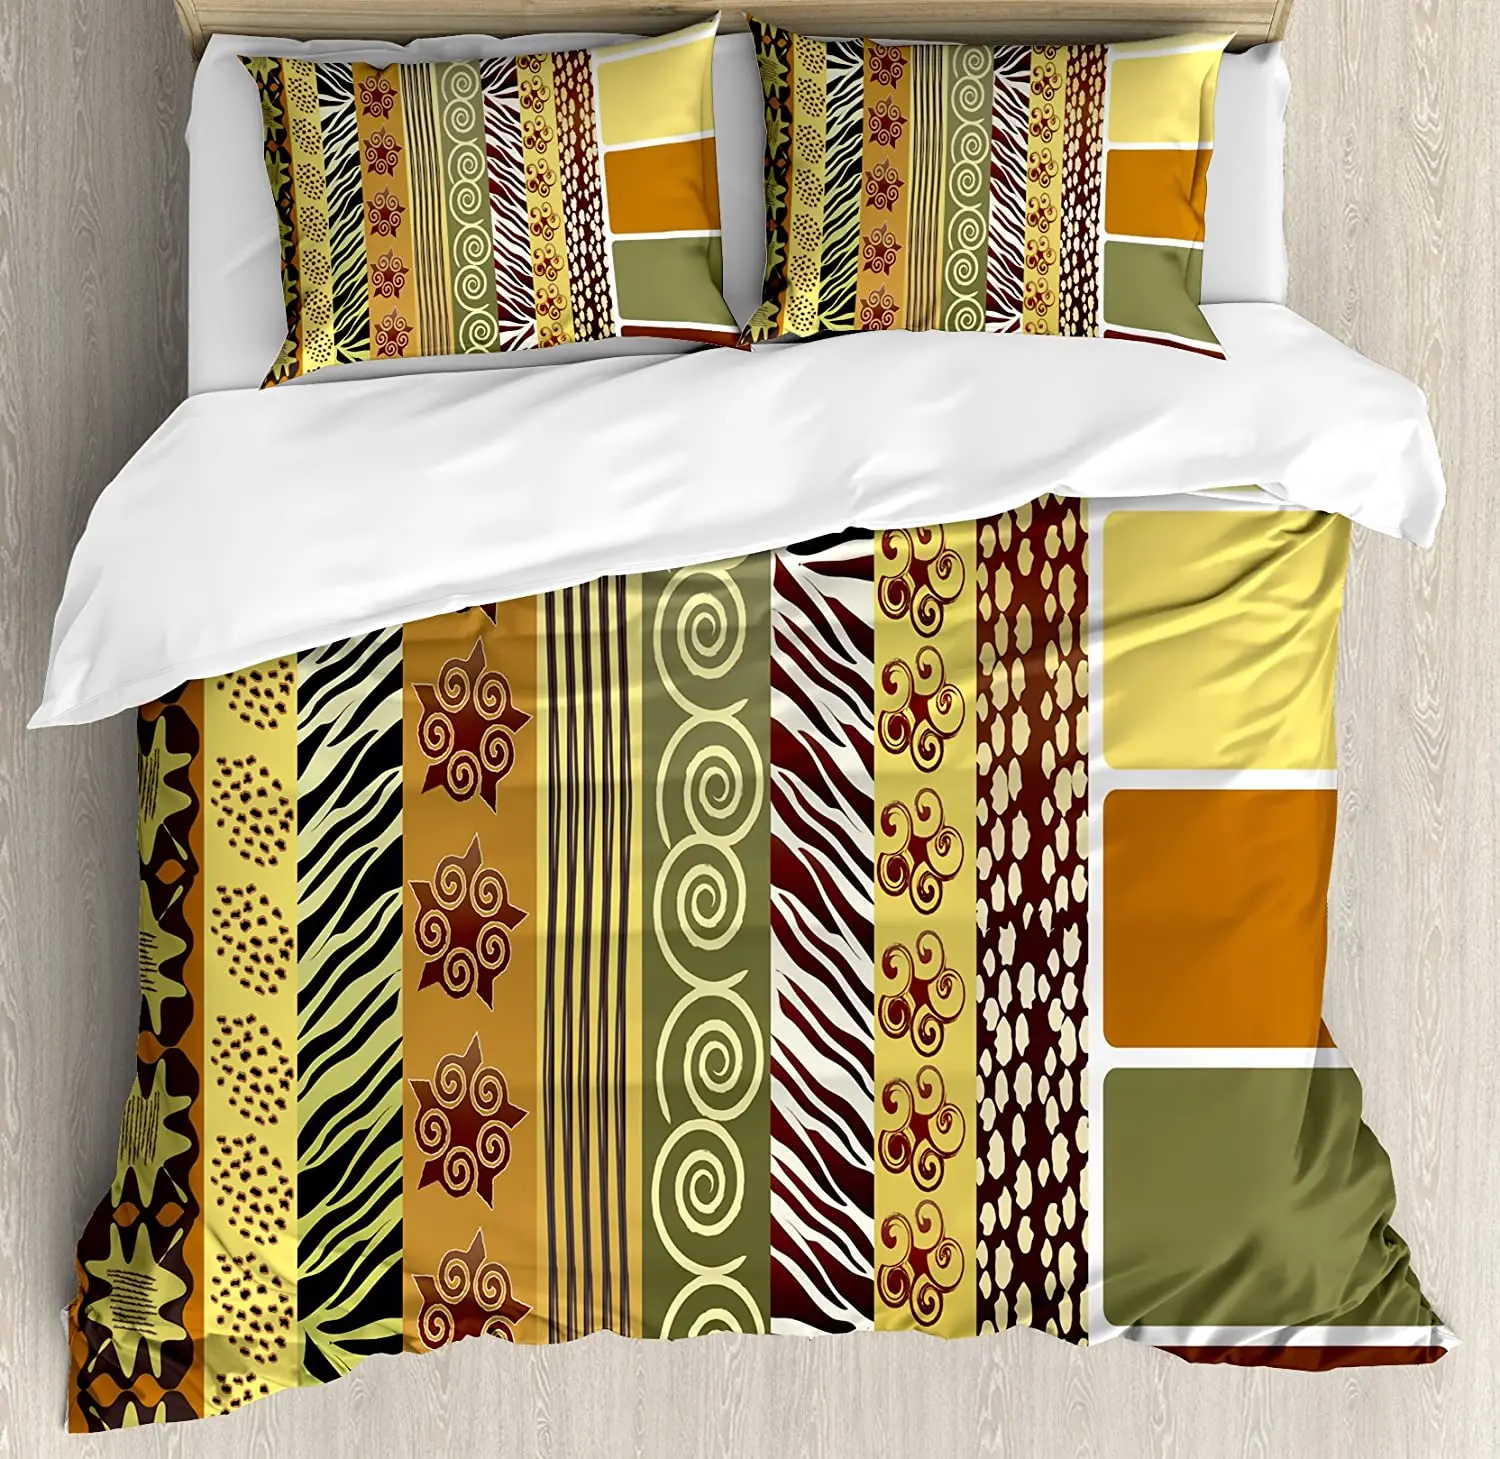 

Zambia Duvet Cover Set Vintage Mixed African Pattern Ancient Earthen Toned Floral Abstract Tribal Image Bedding Set for Home